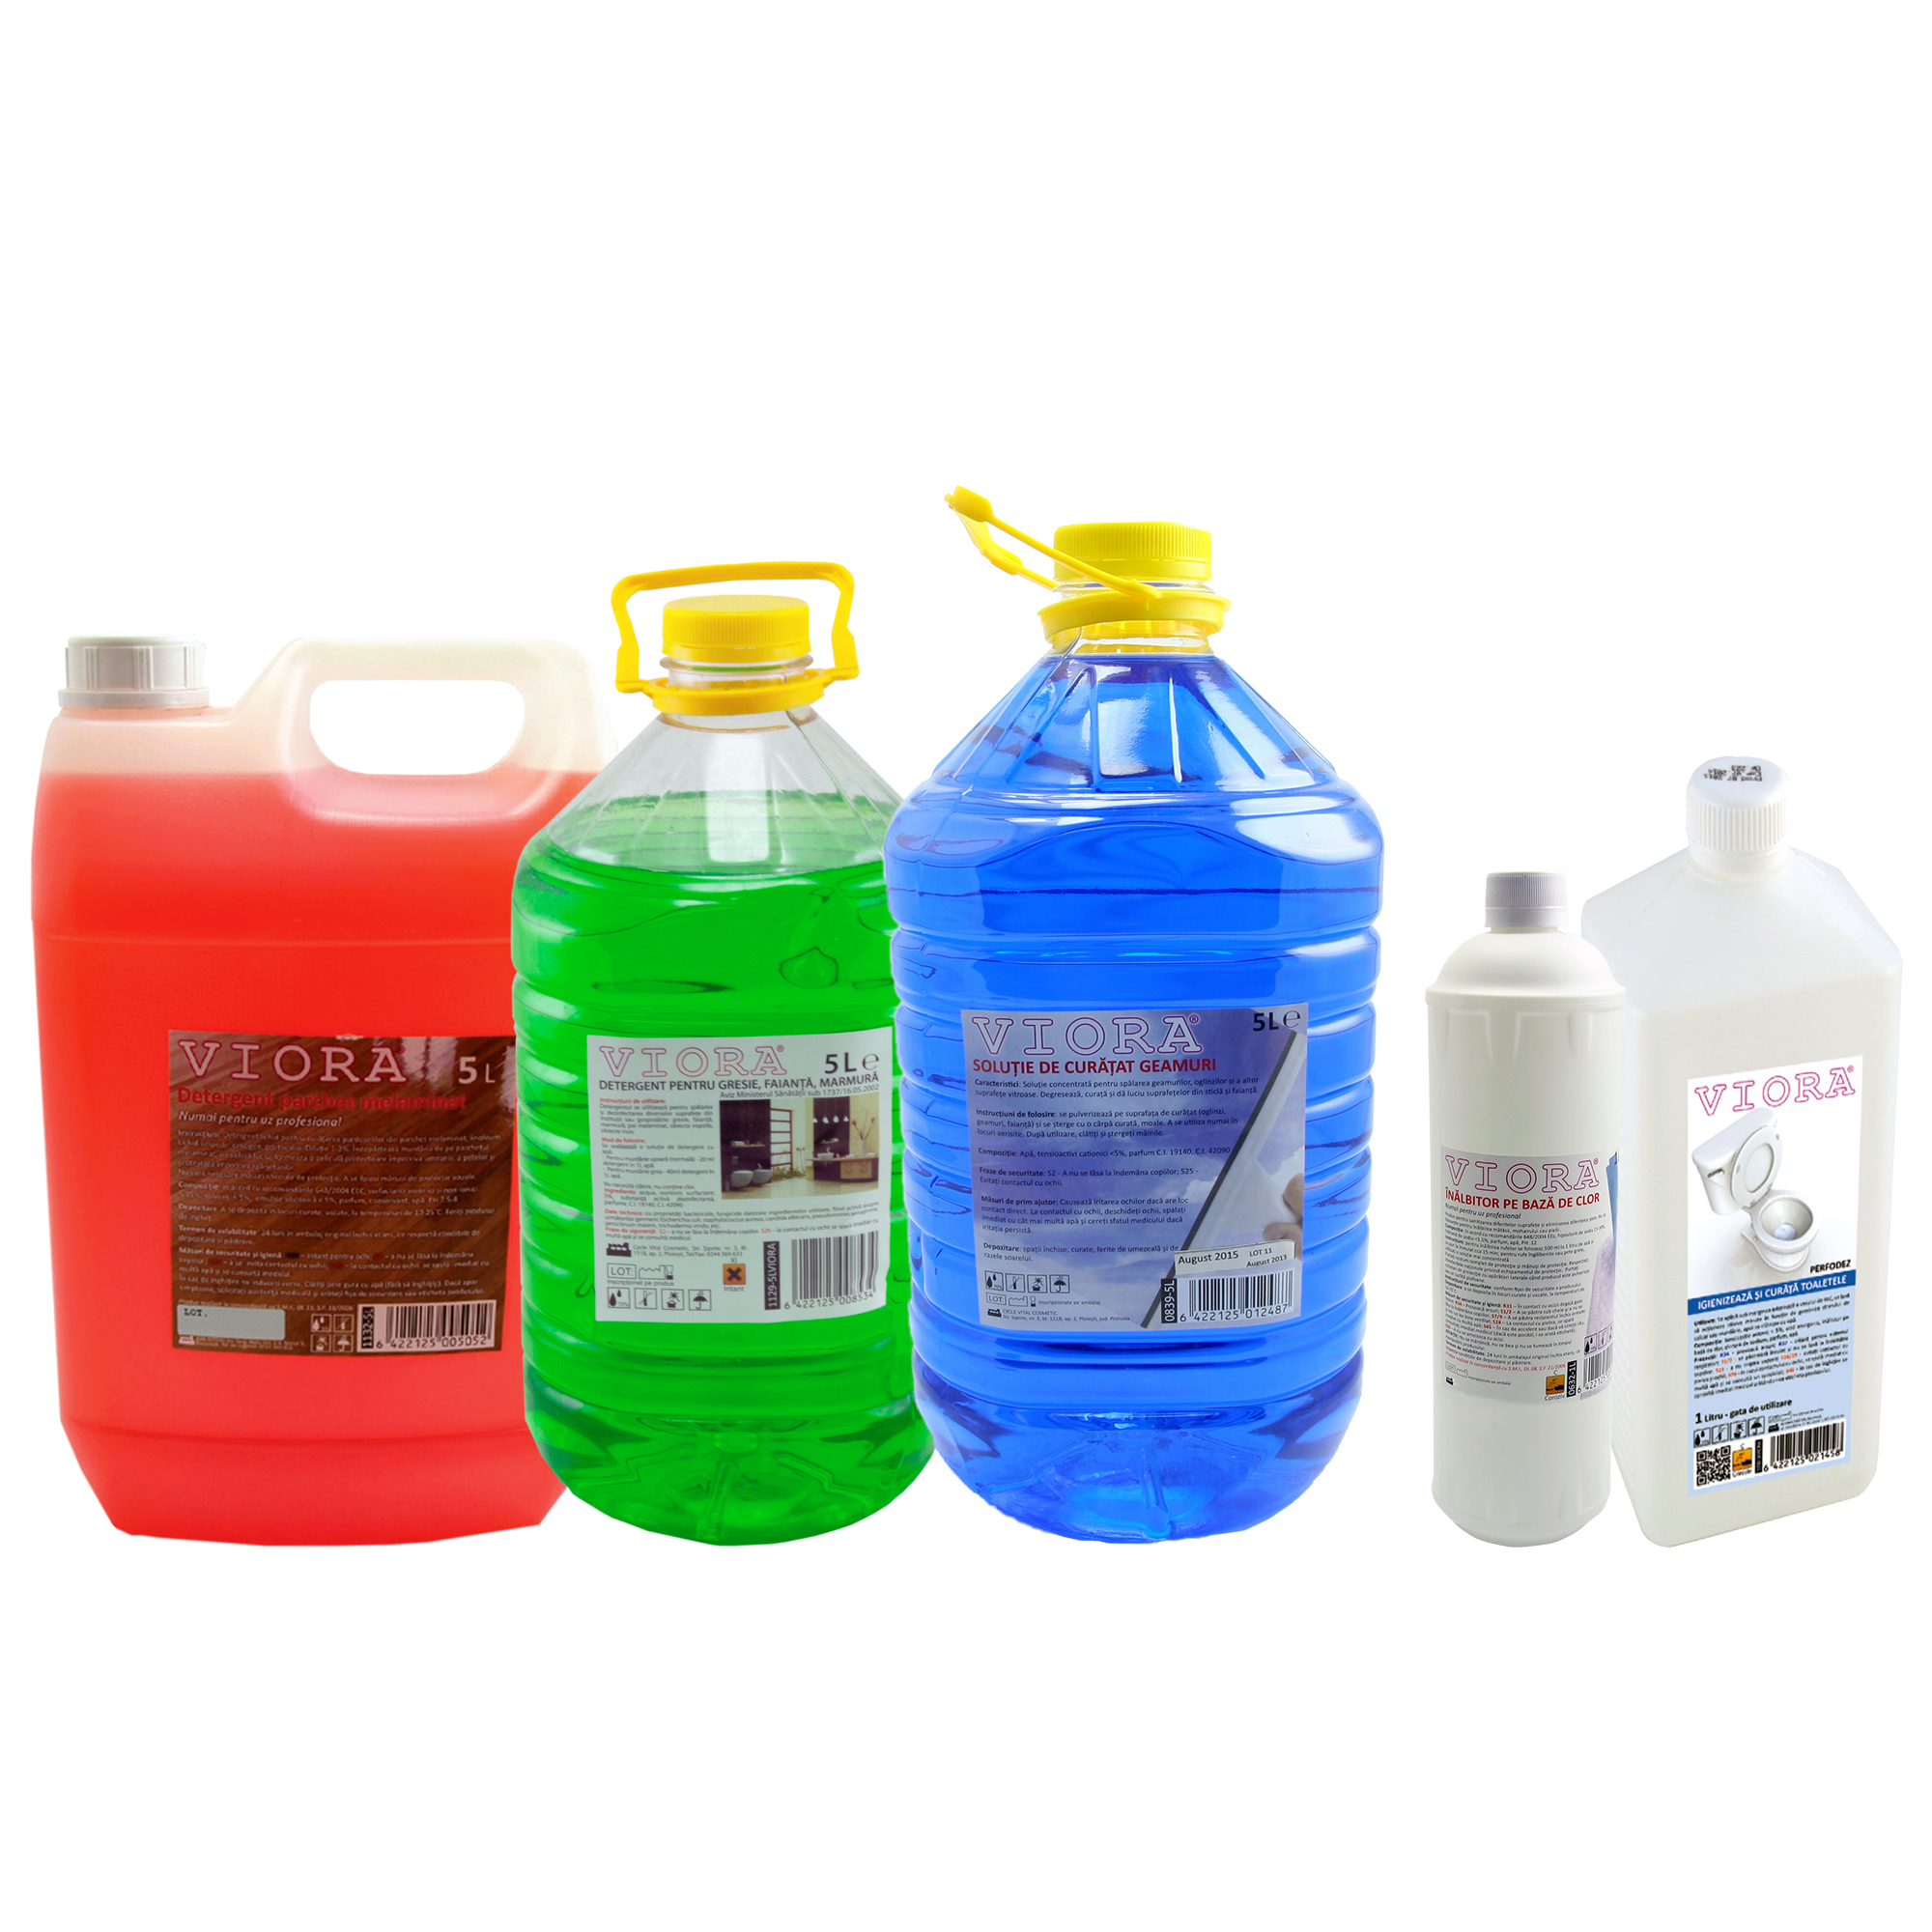 Cleaning and Housekeeping/DETERGENTS/Liquid Detergent